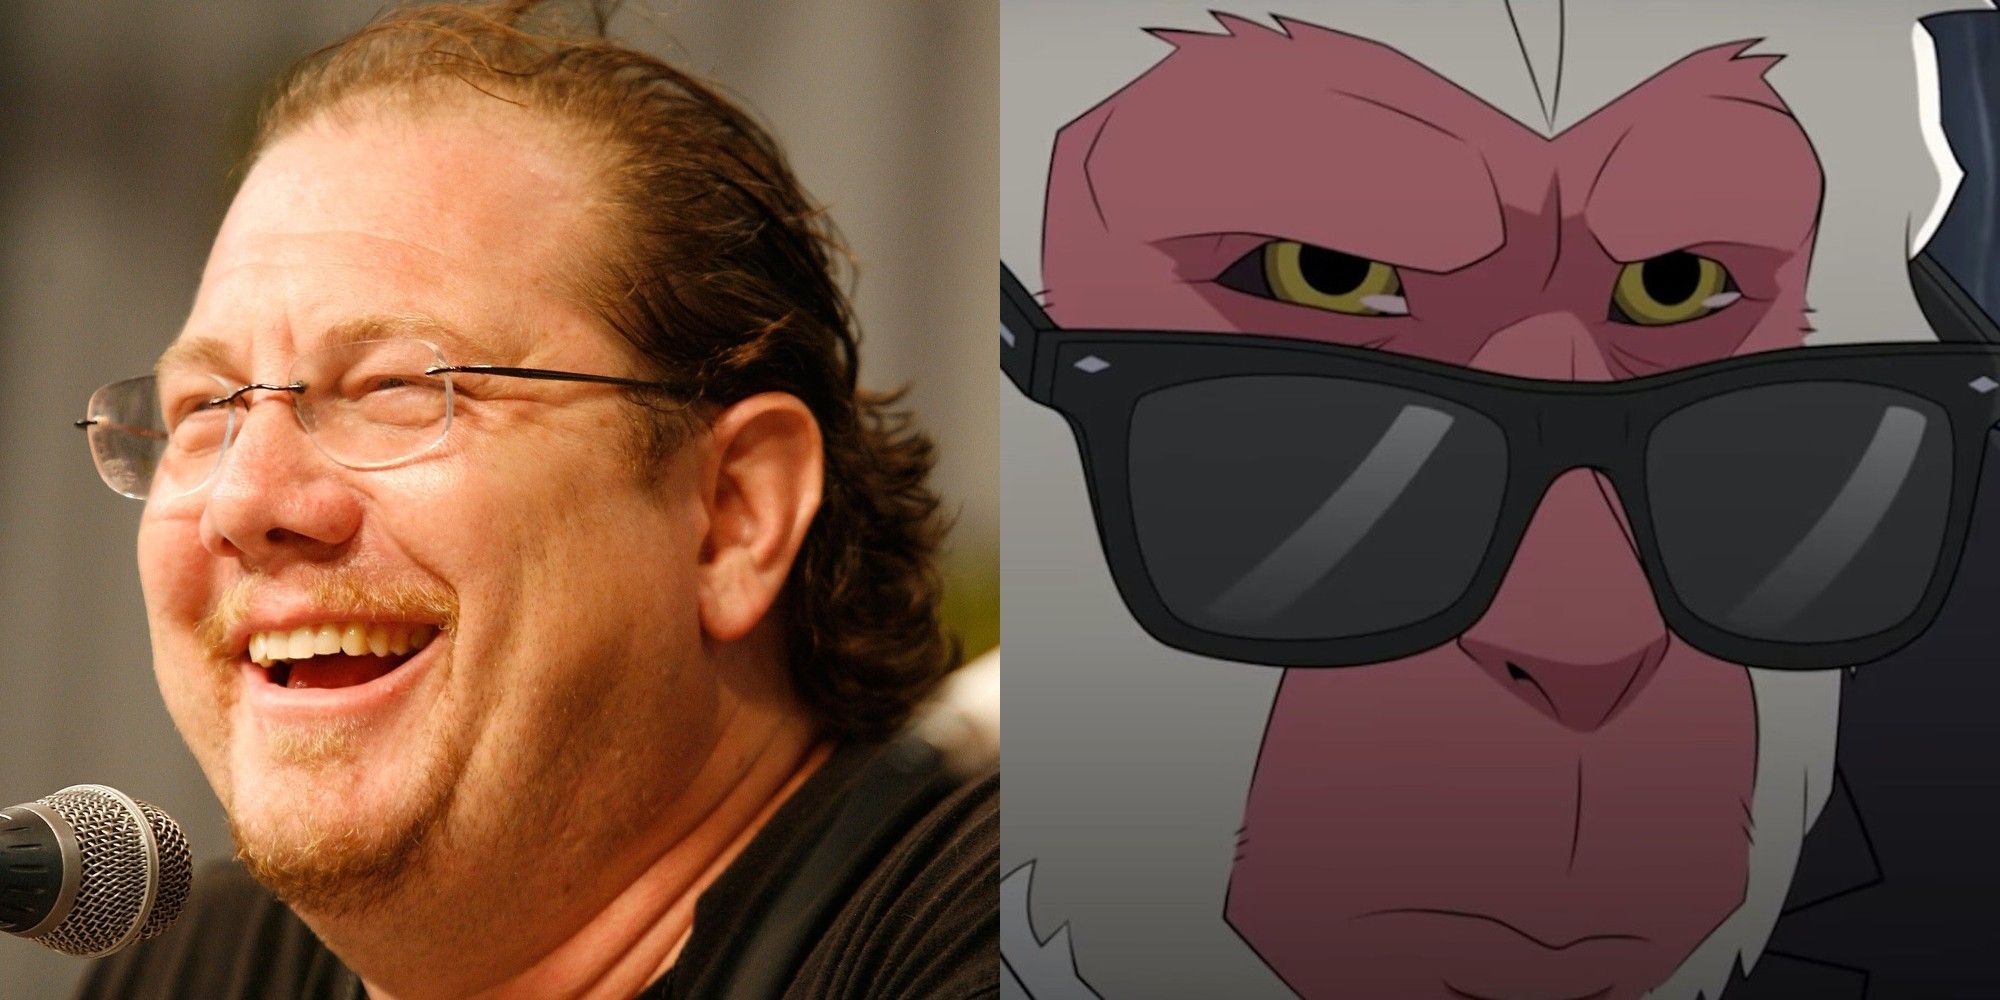 Voice actor Fred Tatasciore in an image next to one of his characters.